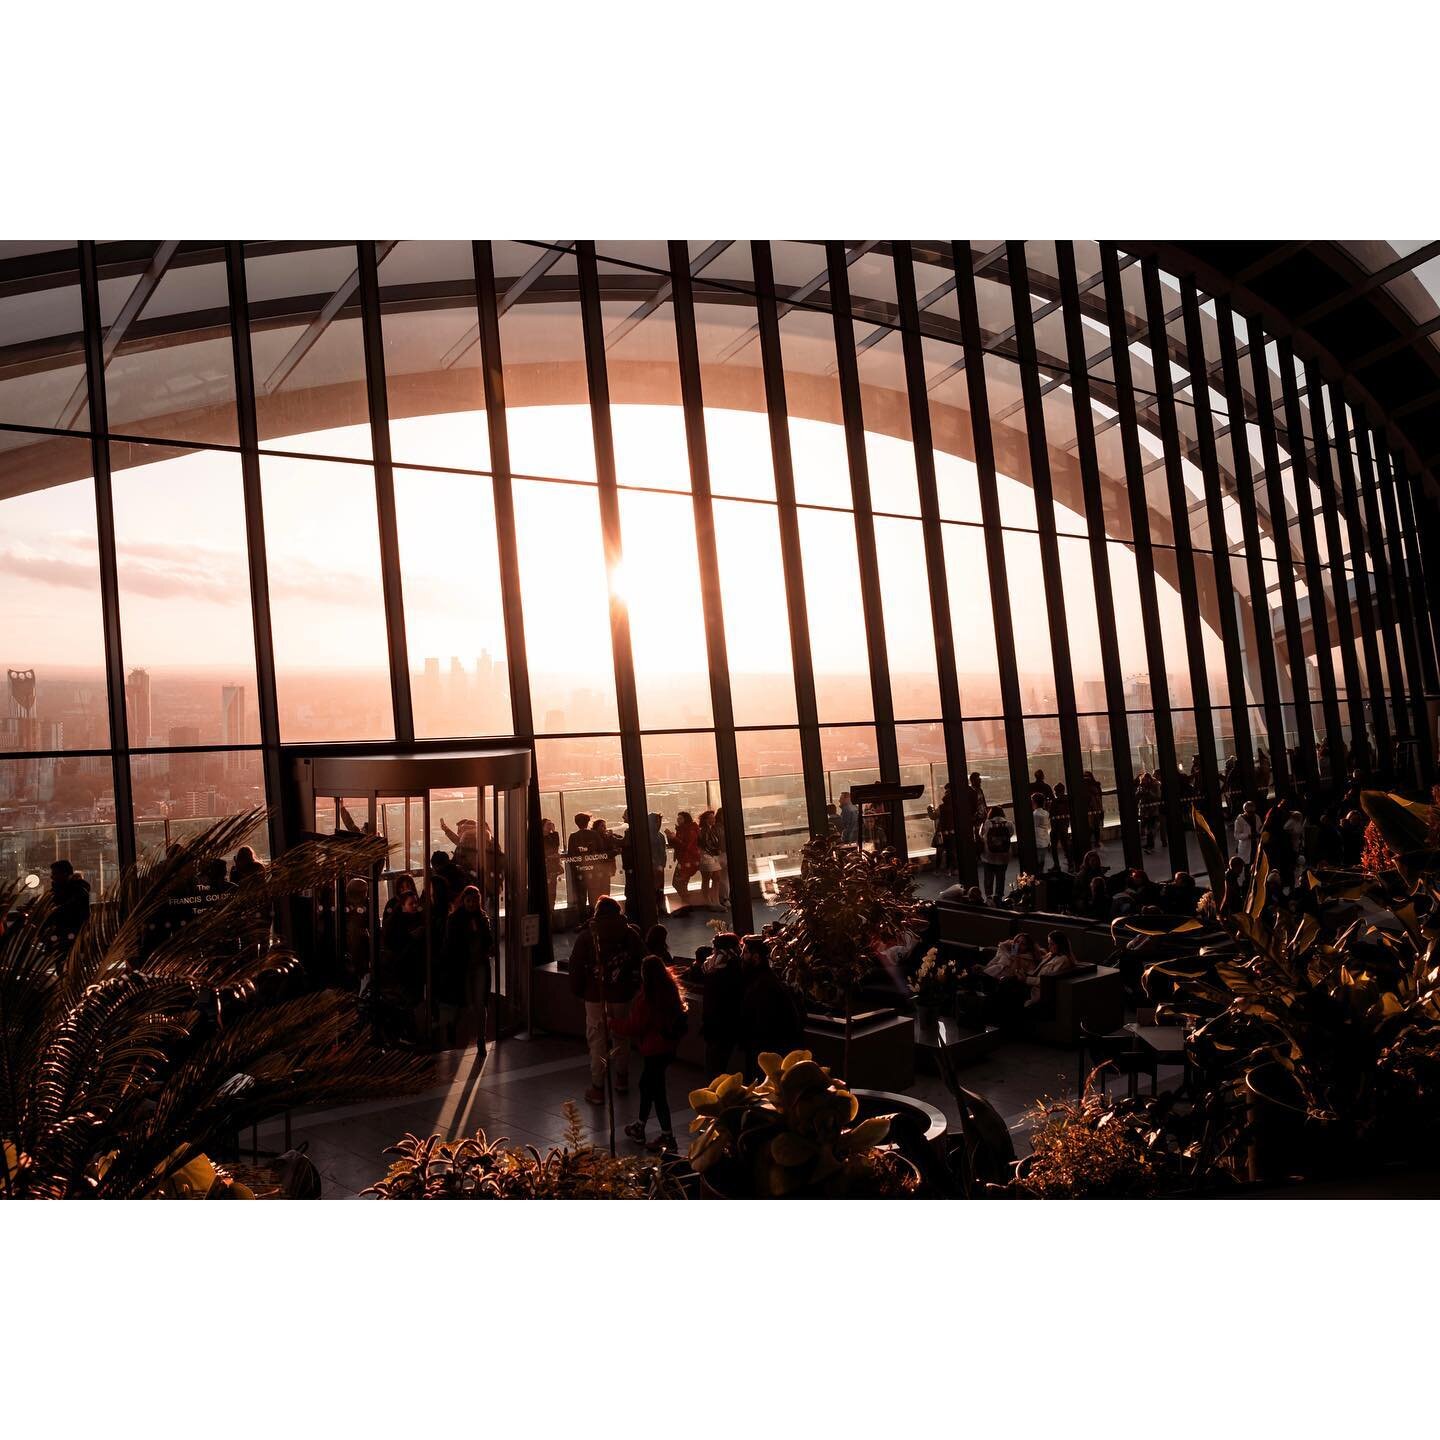 Sky Garden, London.

A place I&rsquo;d intended on visiting for quite a long time but finally remembered to book tickets far enough in advance on this occasion. Loved the views and was treated to a stunning winter sunset.